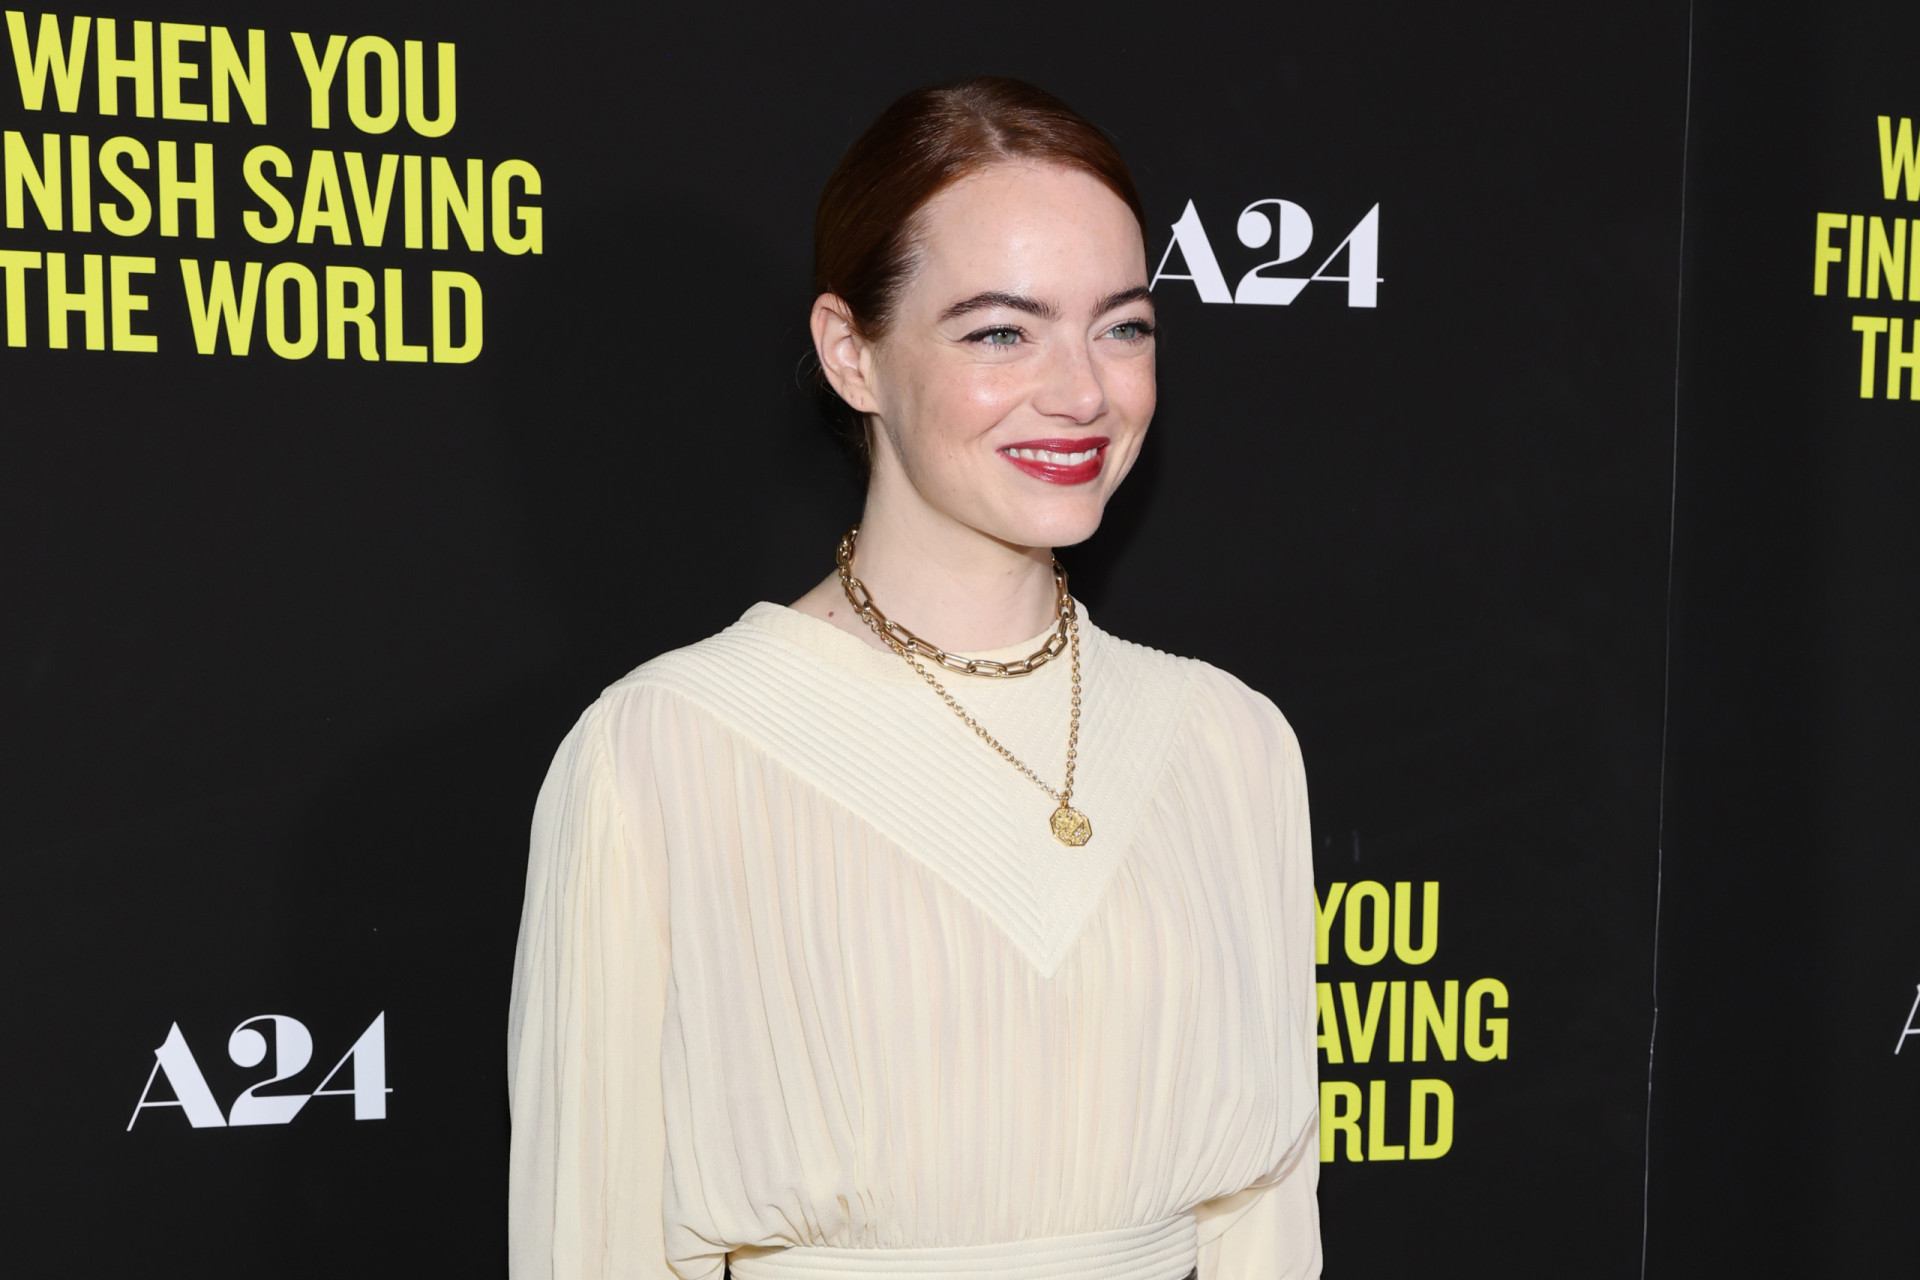 <p>Emma Stone's tarot cards are influenced by her Scorpio birth date. They reflect her transformative energy, making her an actress who fearlessly explores the depths of human emotion.</p><p><a href="https://www.msn.com/en-us/community/channel/vid-7xx8mnucu55yw63we9va2gwr7uihbxwc68fxqp25x6tg4ftibpra?cvid=94631541bc0f4f89bfd59158d696ad7e">Follow us and access great exclusive content every day</a></p>